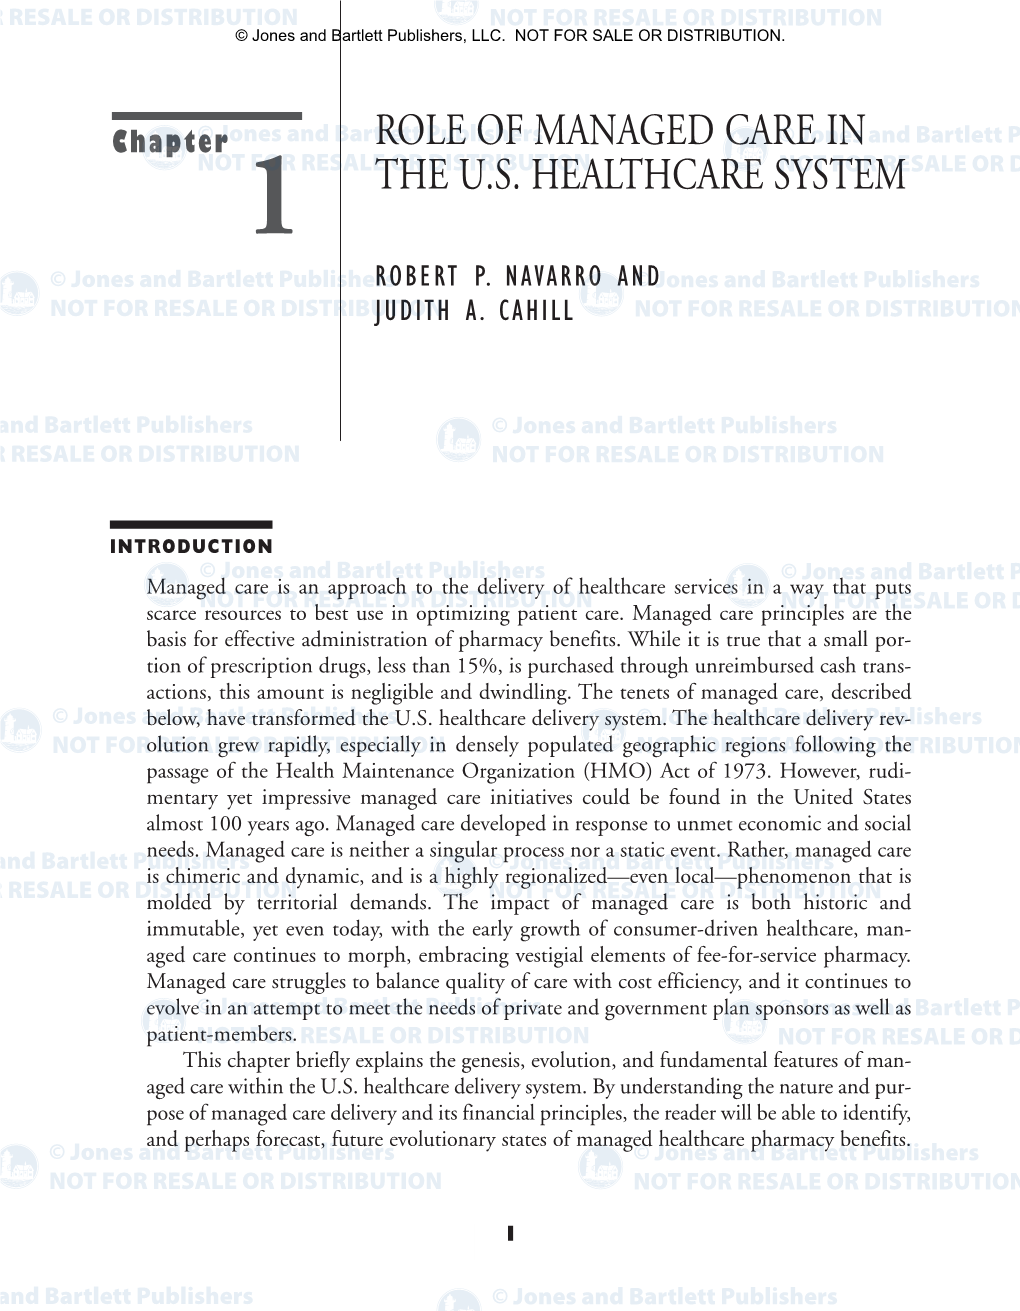 Role of Managed Care in the U.S. Healthcare System